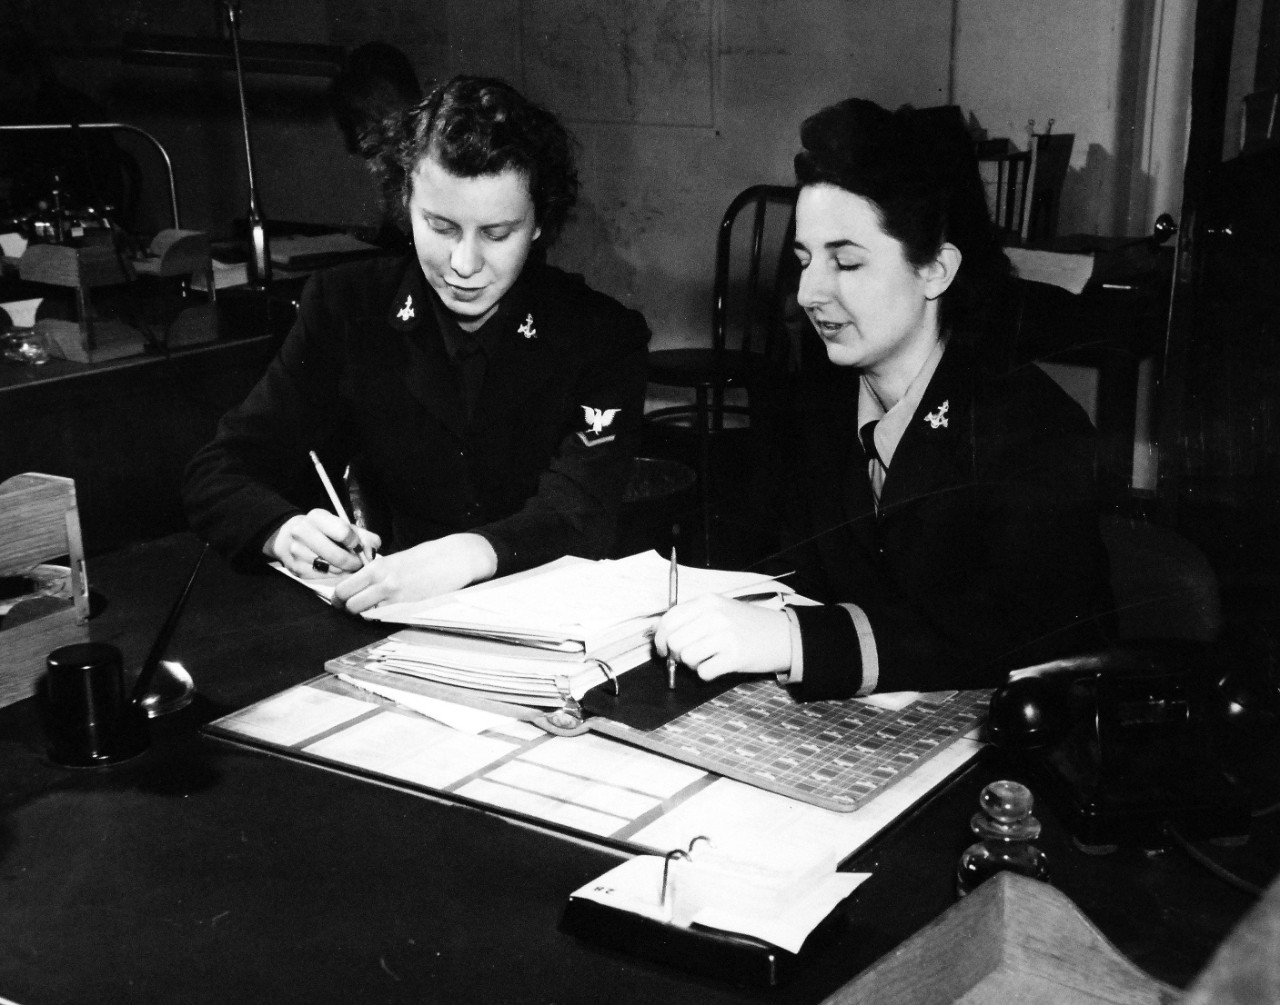 80-G-40220:  WAVES Ensign Mary H. Banker, January 1943.   Banker is dictating letter to YN3 Elizabeth Blum at the Navy Department, Washington, D.C., January 2, 1943.  Official U.S. Navy photograph, now in the collections of the national Archives.  